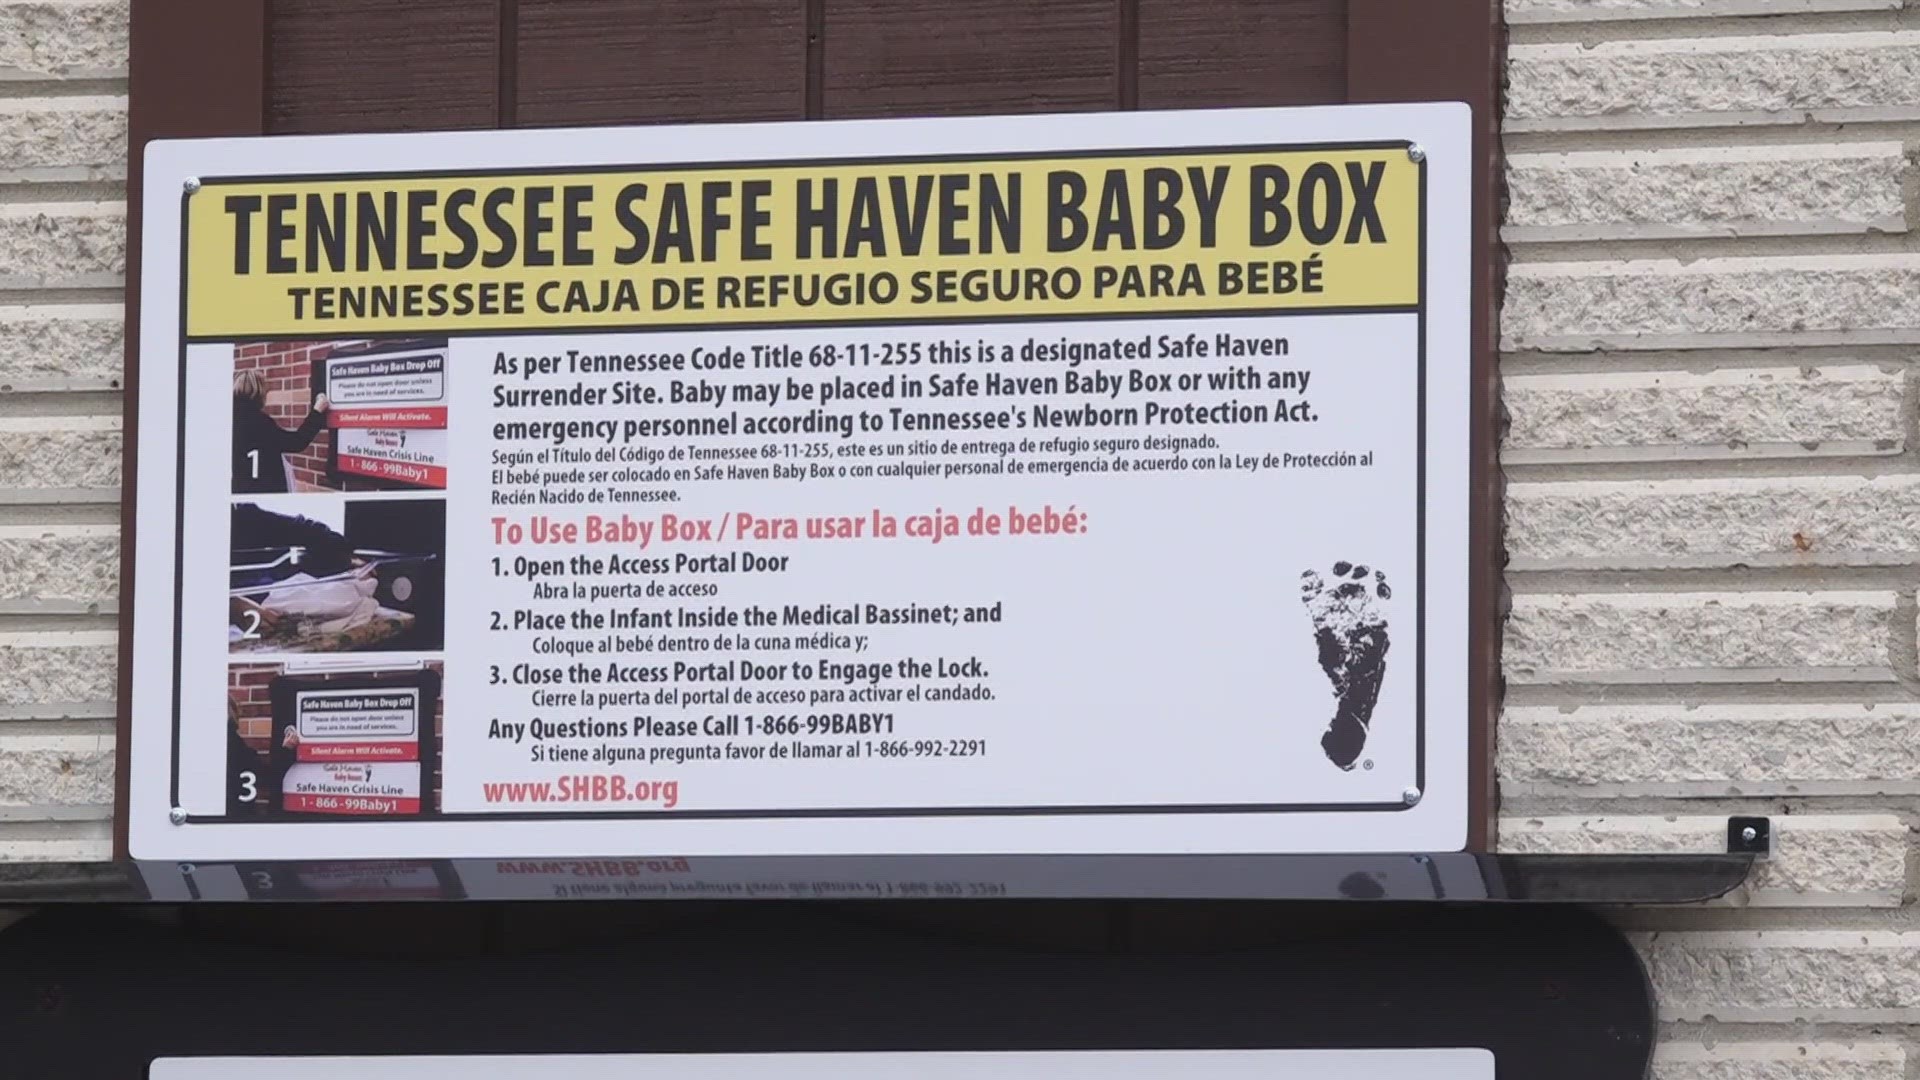 The fundraiser aims to raise $12,000 to install a "Safe Haven Baby Box," giving parents a chance to anonymously surrender newborns.